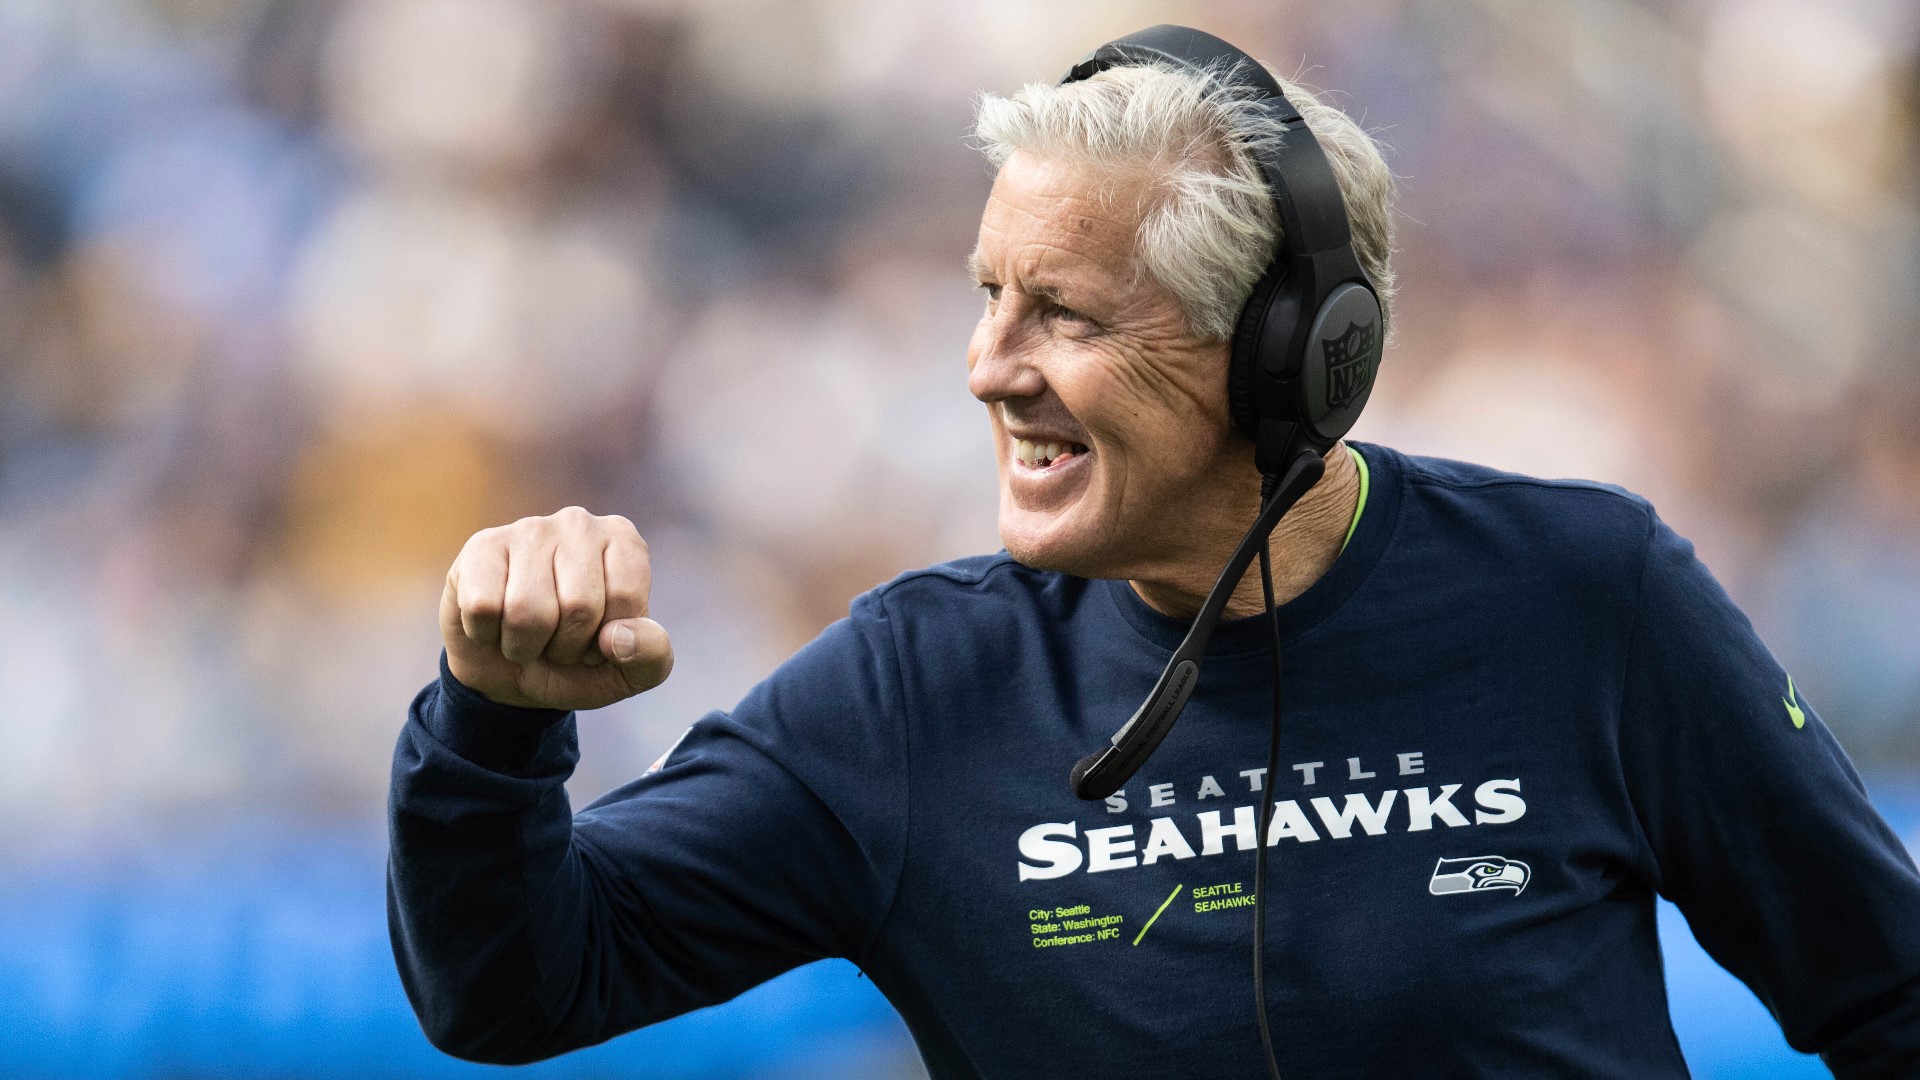 The longtime Seahawks coach thanked his wife, Glena, and his kids for their role in his 14-year tenure with the Seattle franchise.